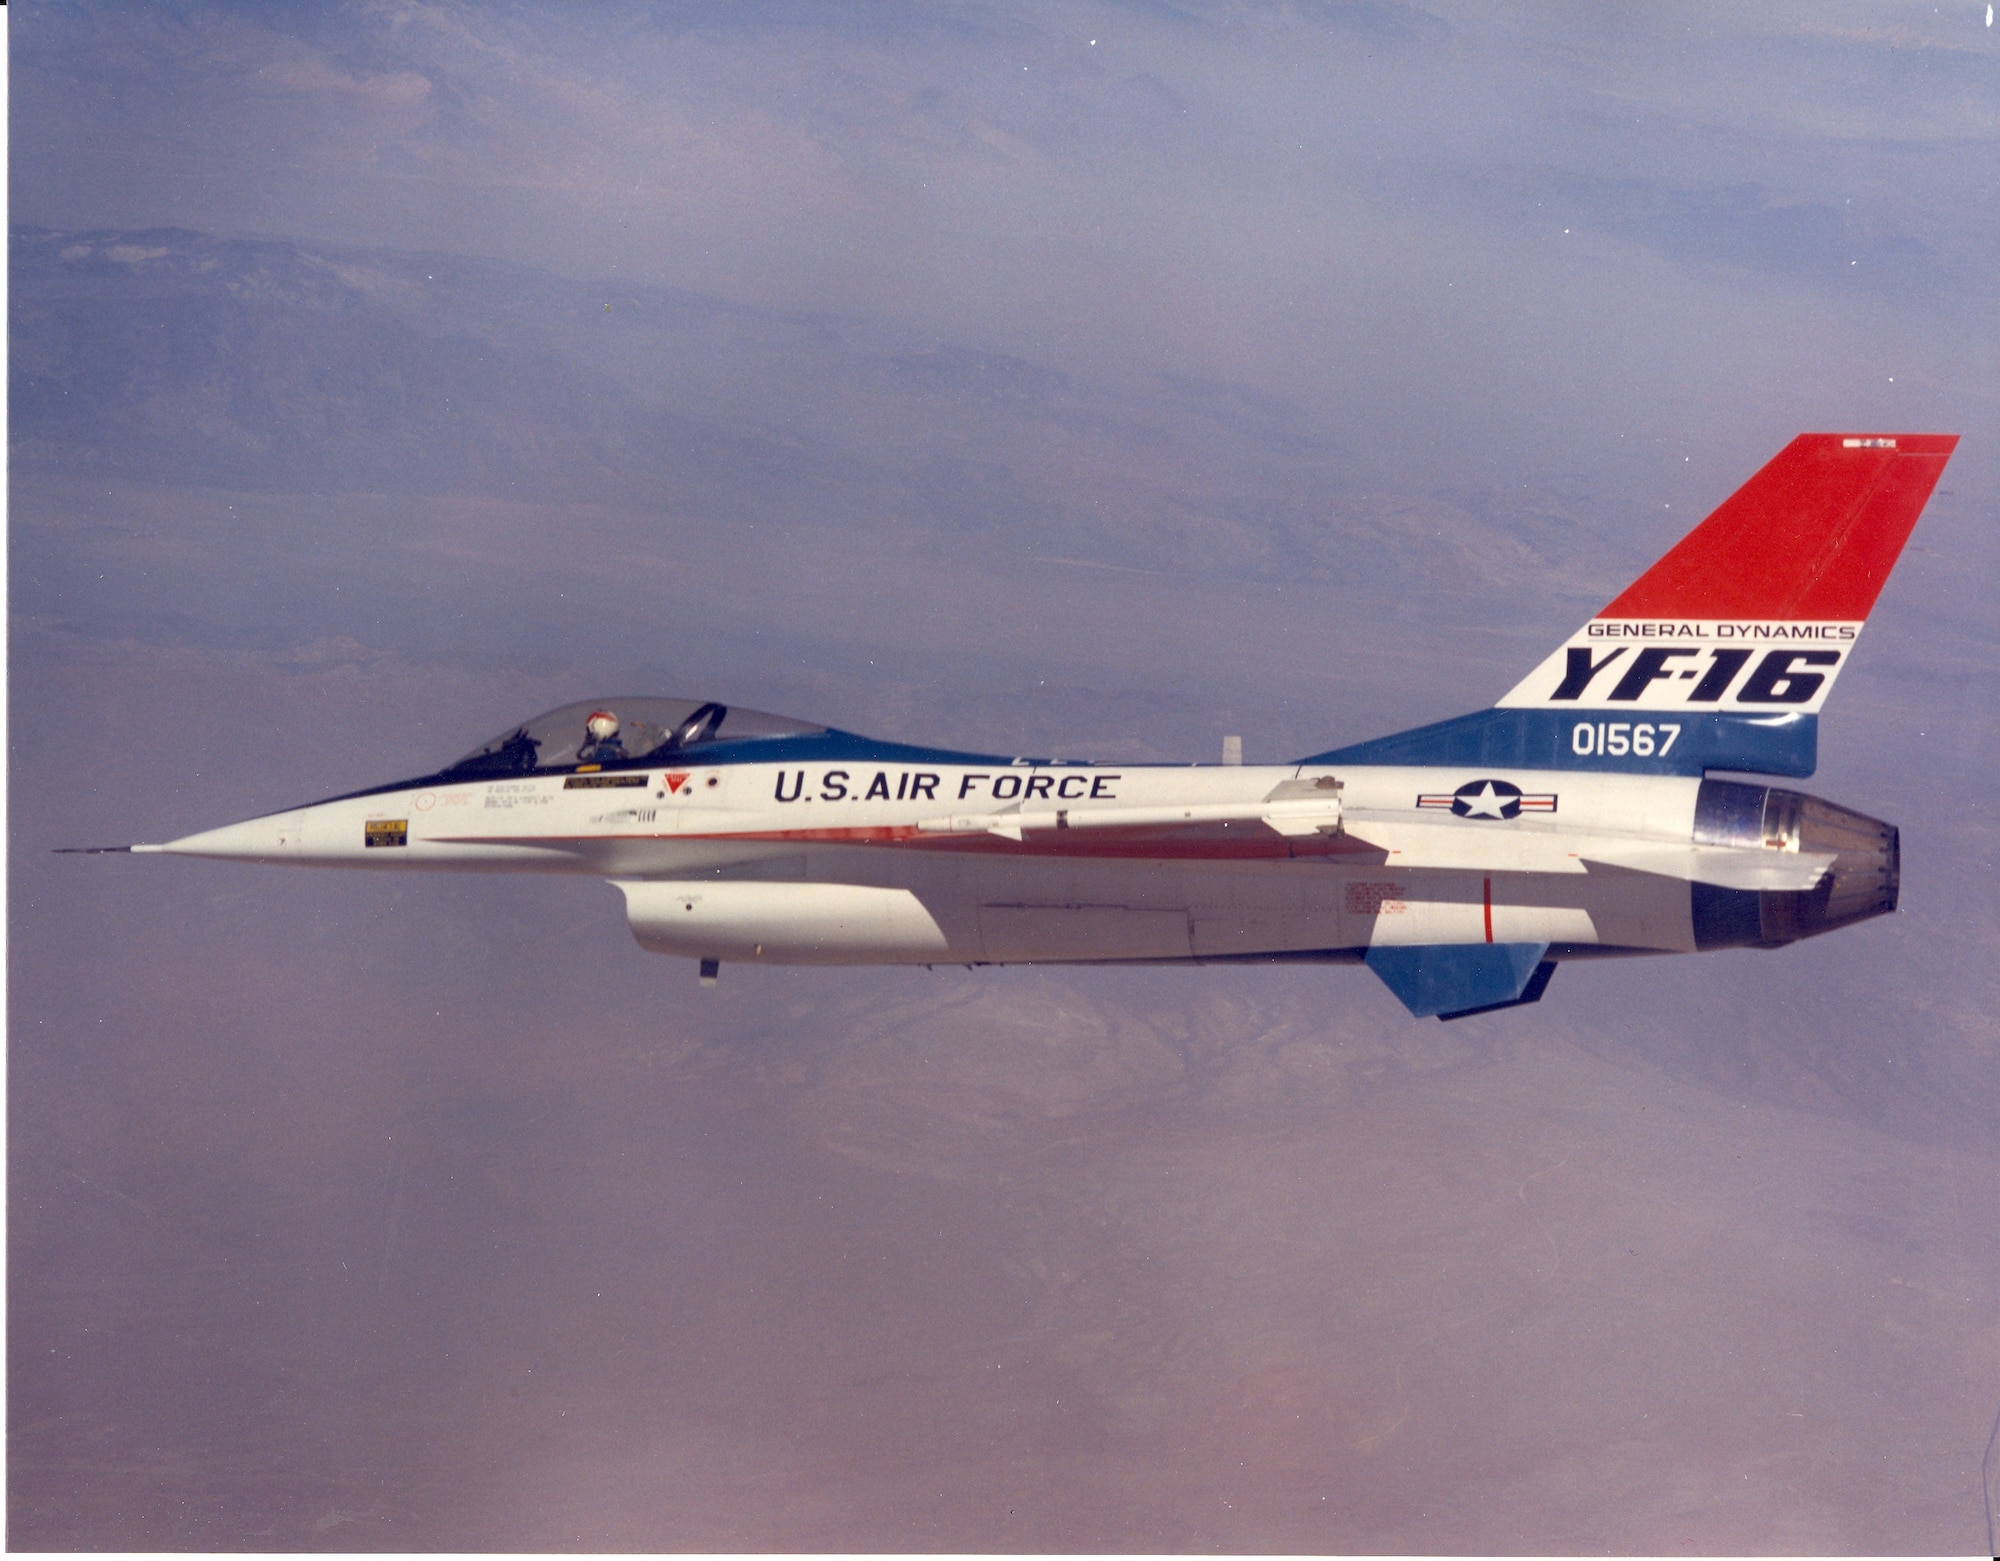 Employing "fly-by-wire" technology, the prototype General Dynamics YF-16 completed its first flight over Edwards Air Force Base, Calif., Feb. 2, 1974. The aircraft went on to win a fly-off competition against the Northrop YF-17 for an Air Force lightweight multi-role fighter contract. The F-16 Fighting Falcon would also fly for allied nations around the world. (Courtesy photo)